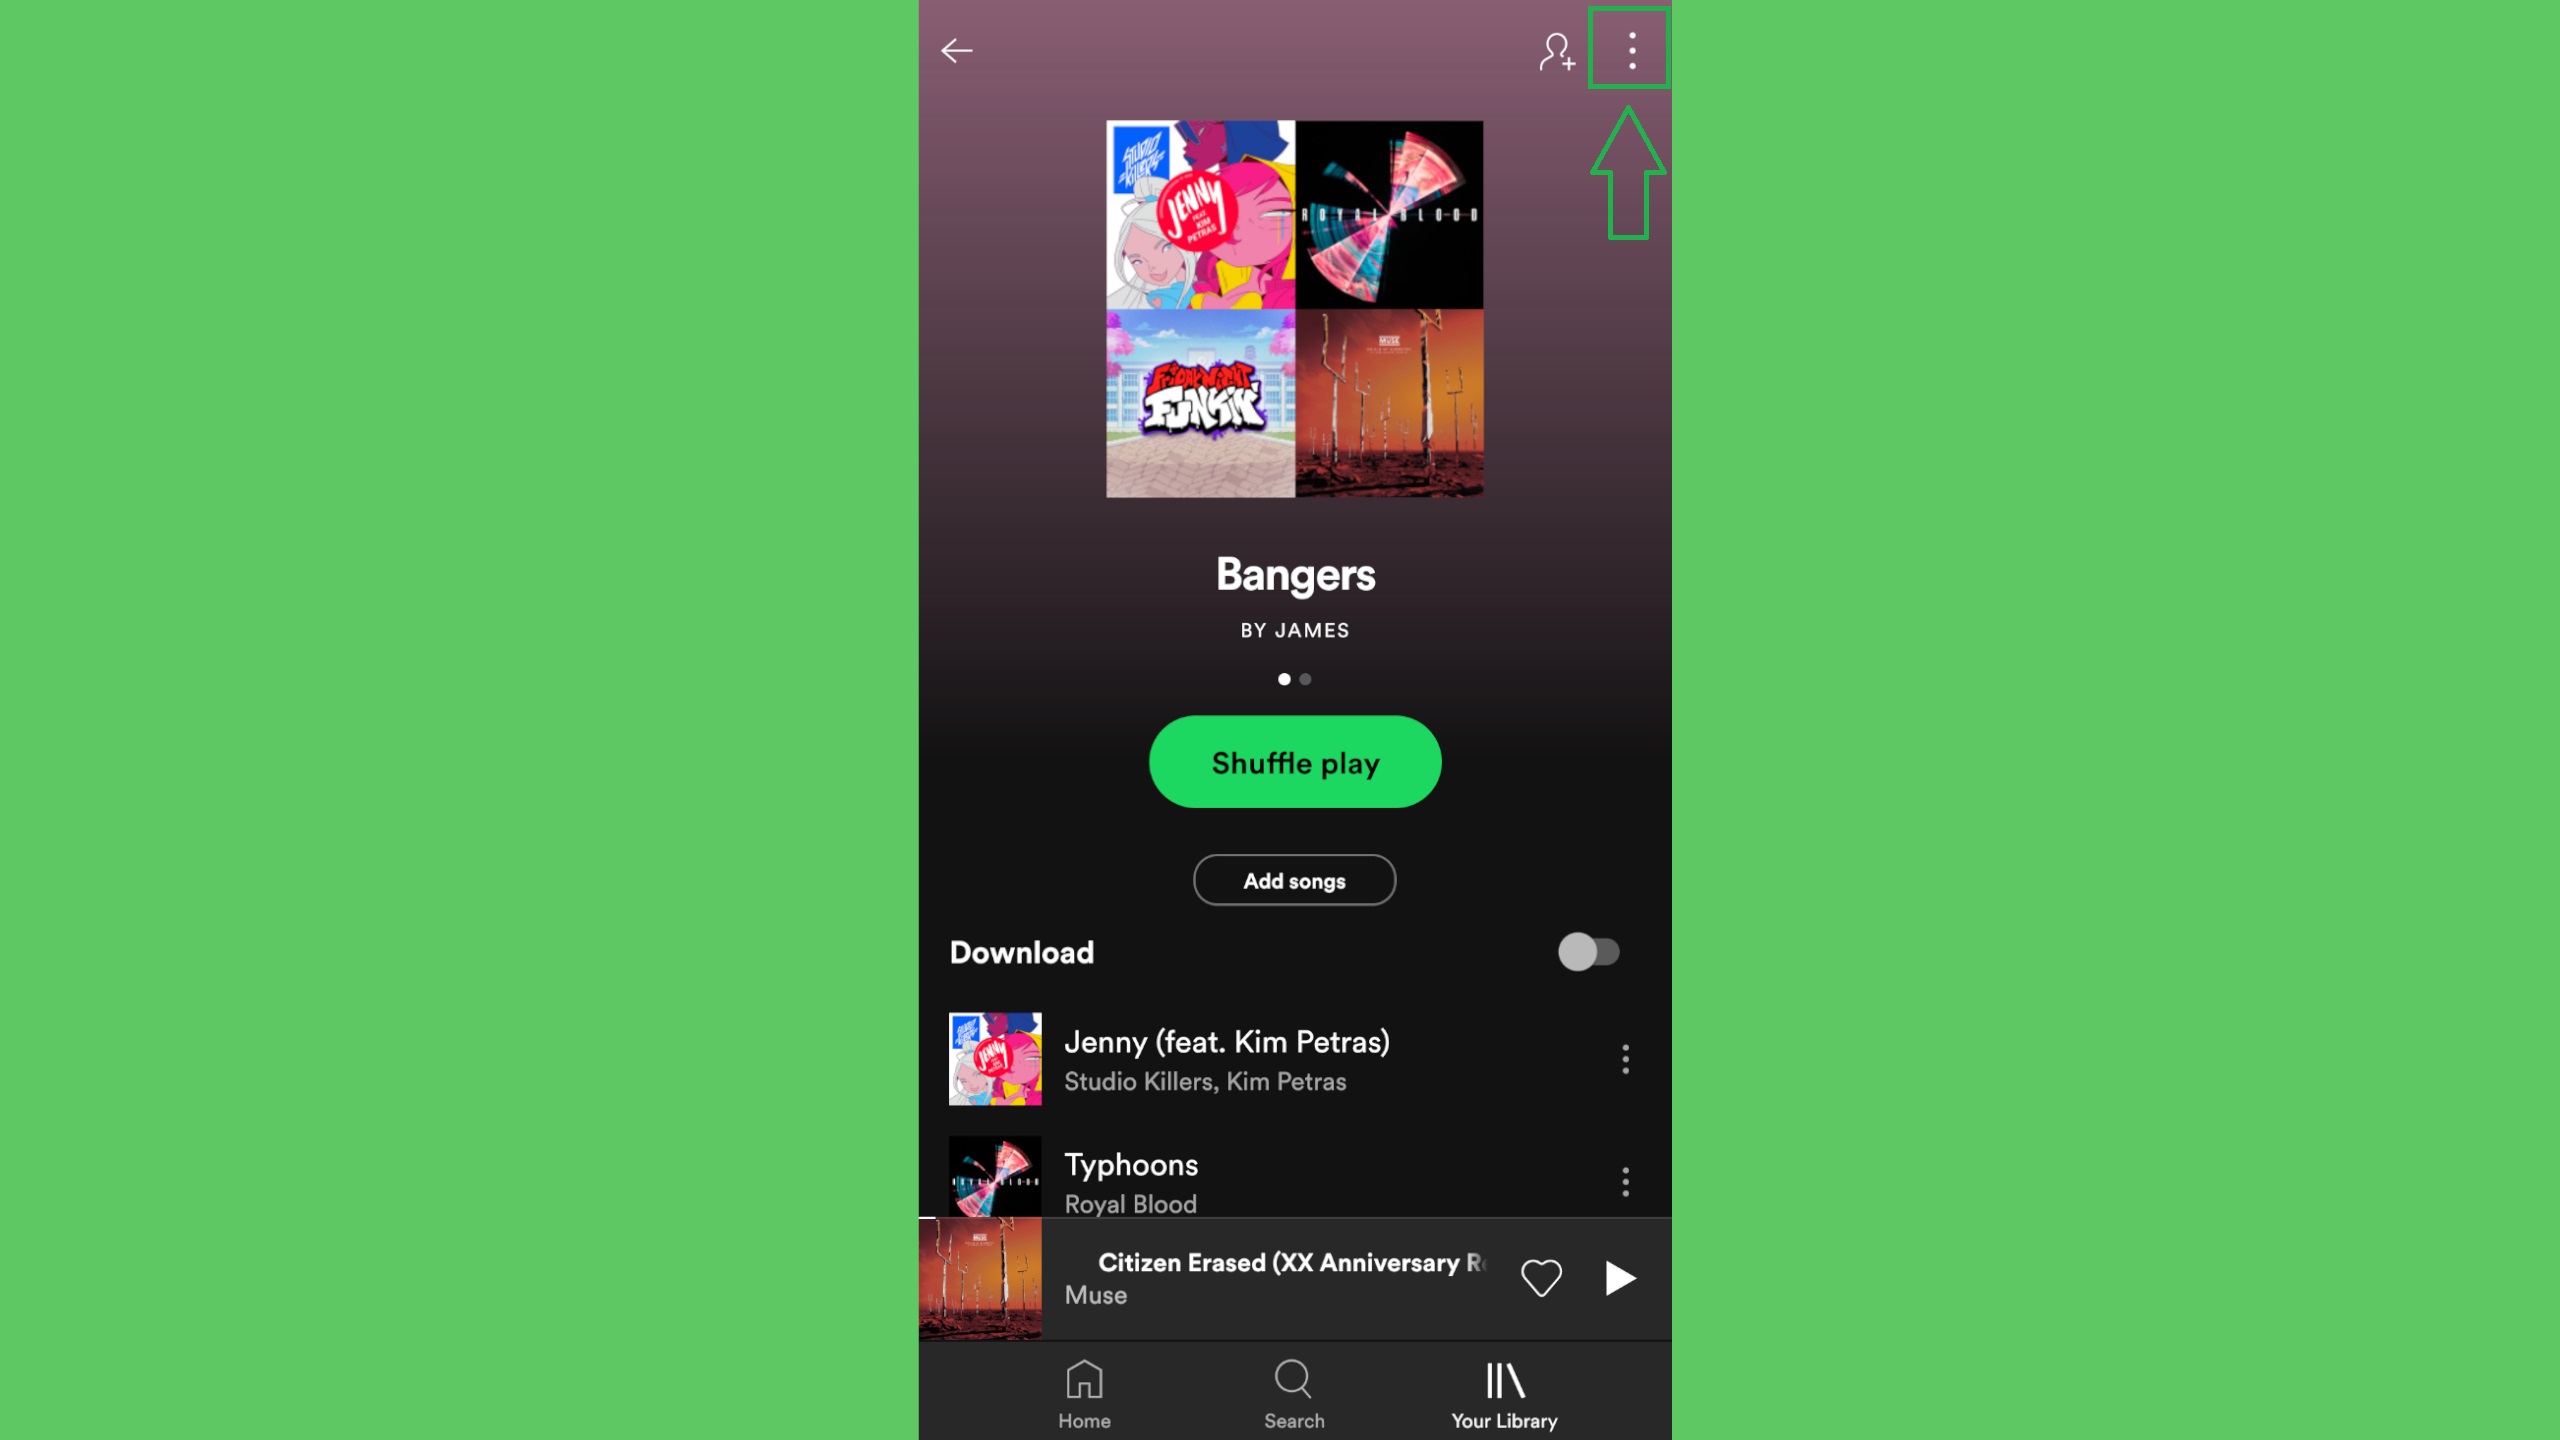 How to Download Songs in Spotify on Android Step 1: Open the Menu on the Playlist